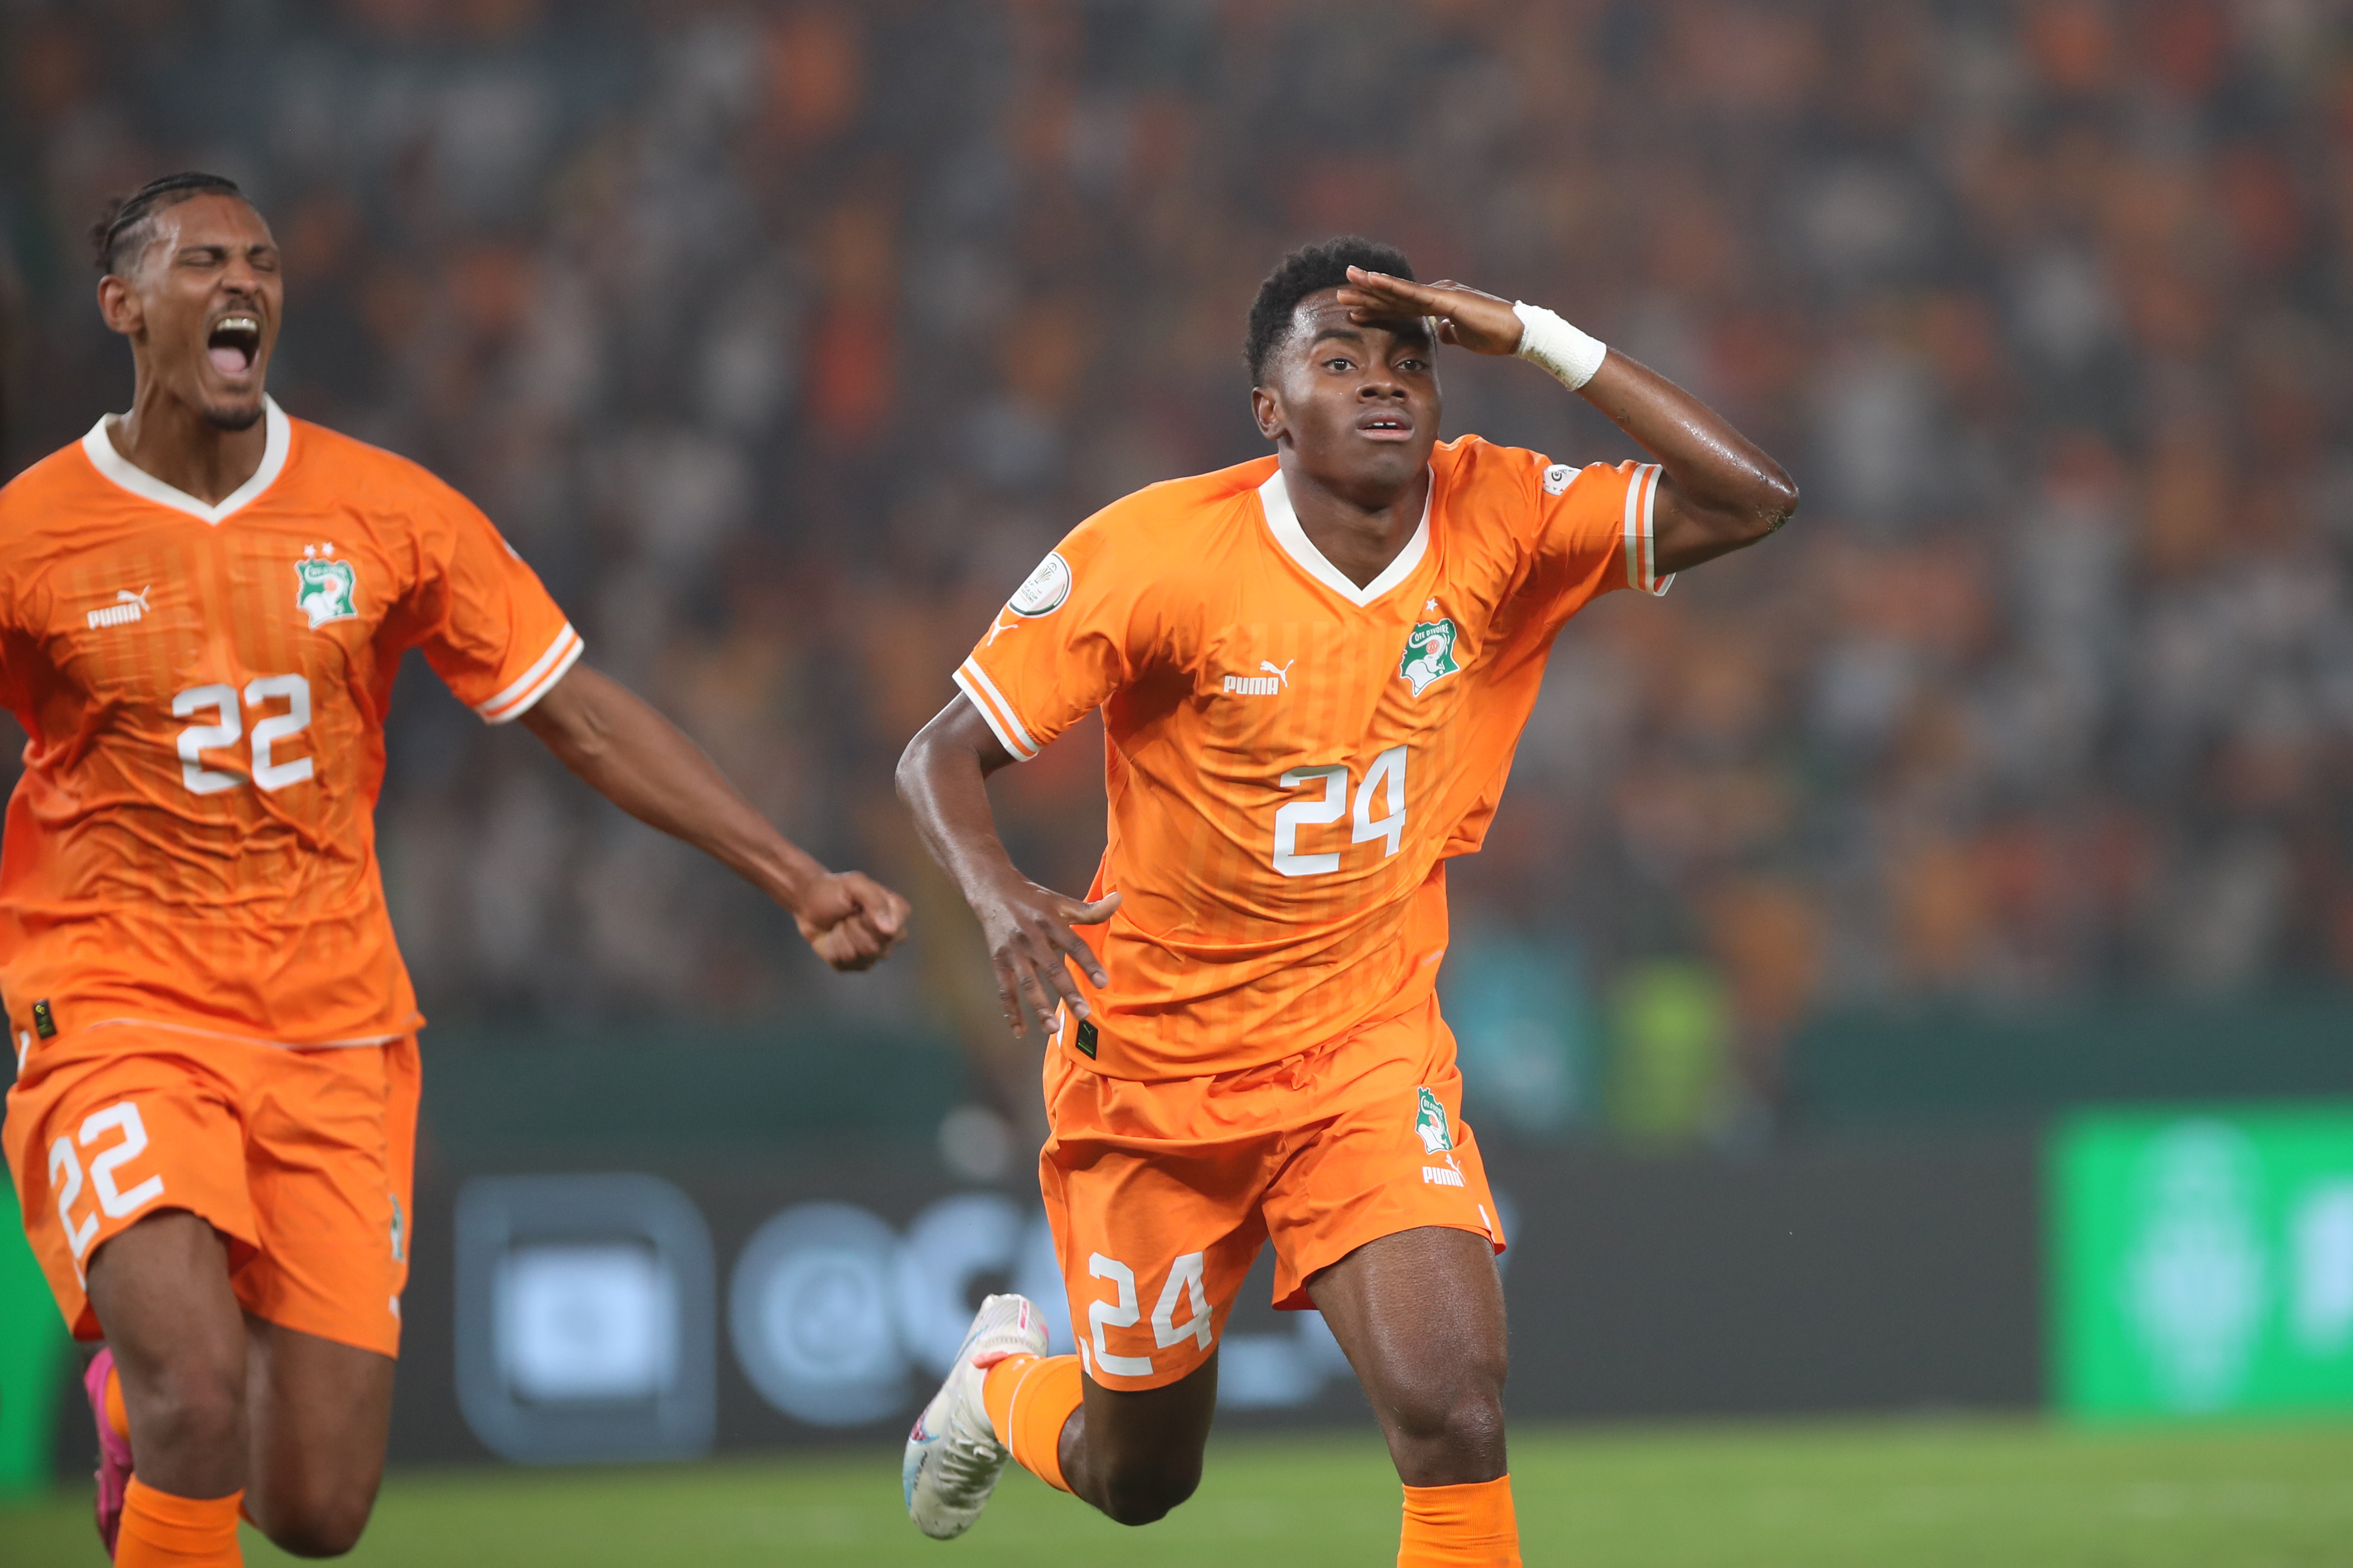 Late drama as Cote d'Ivoire come back from behind to beat Mali